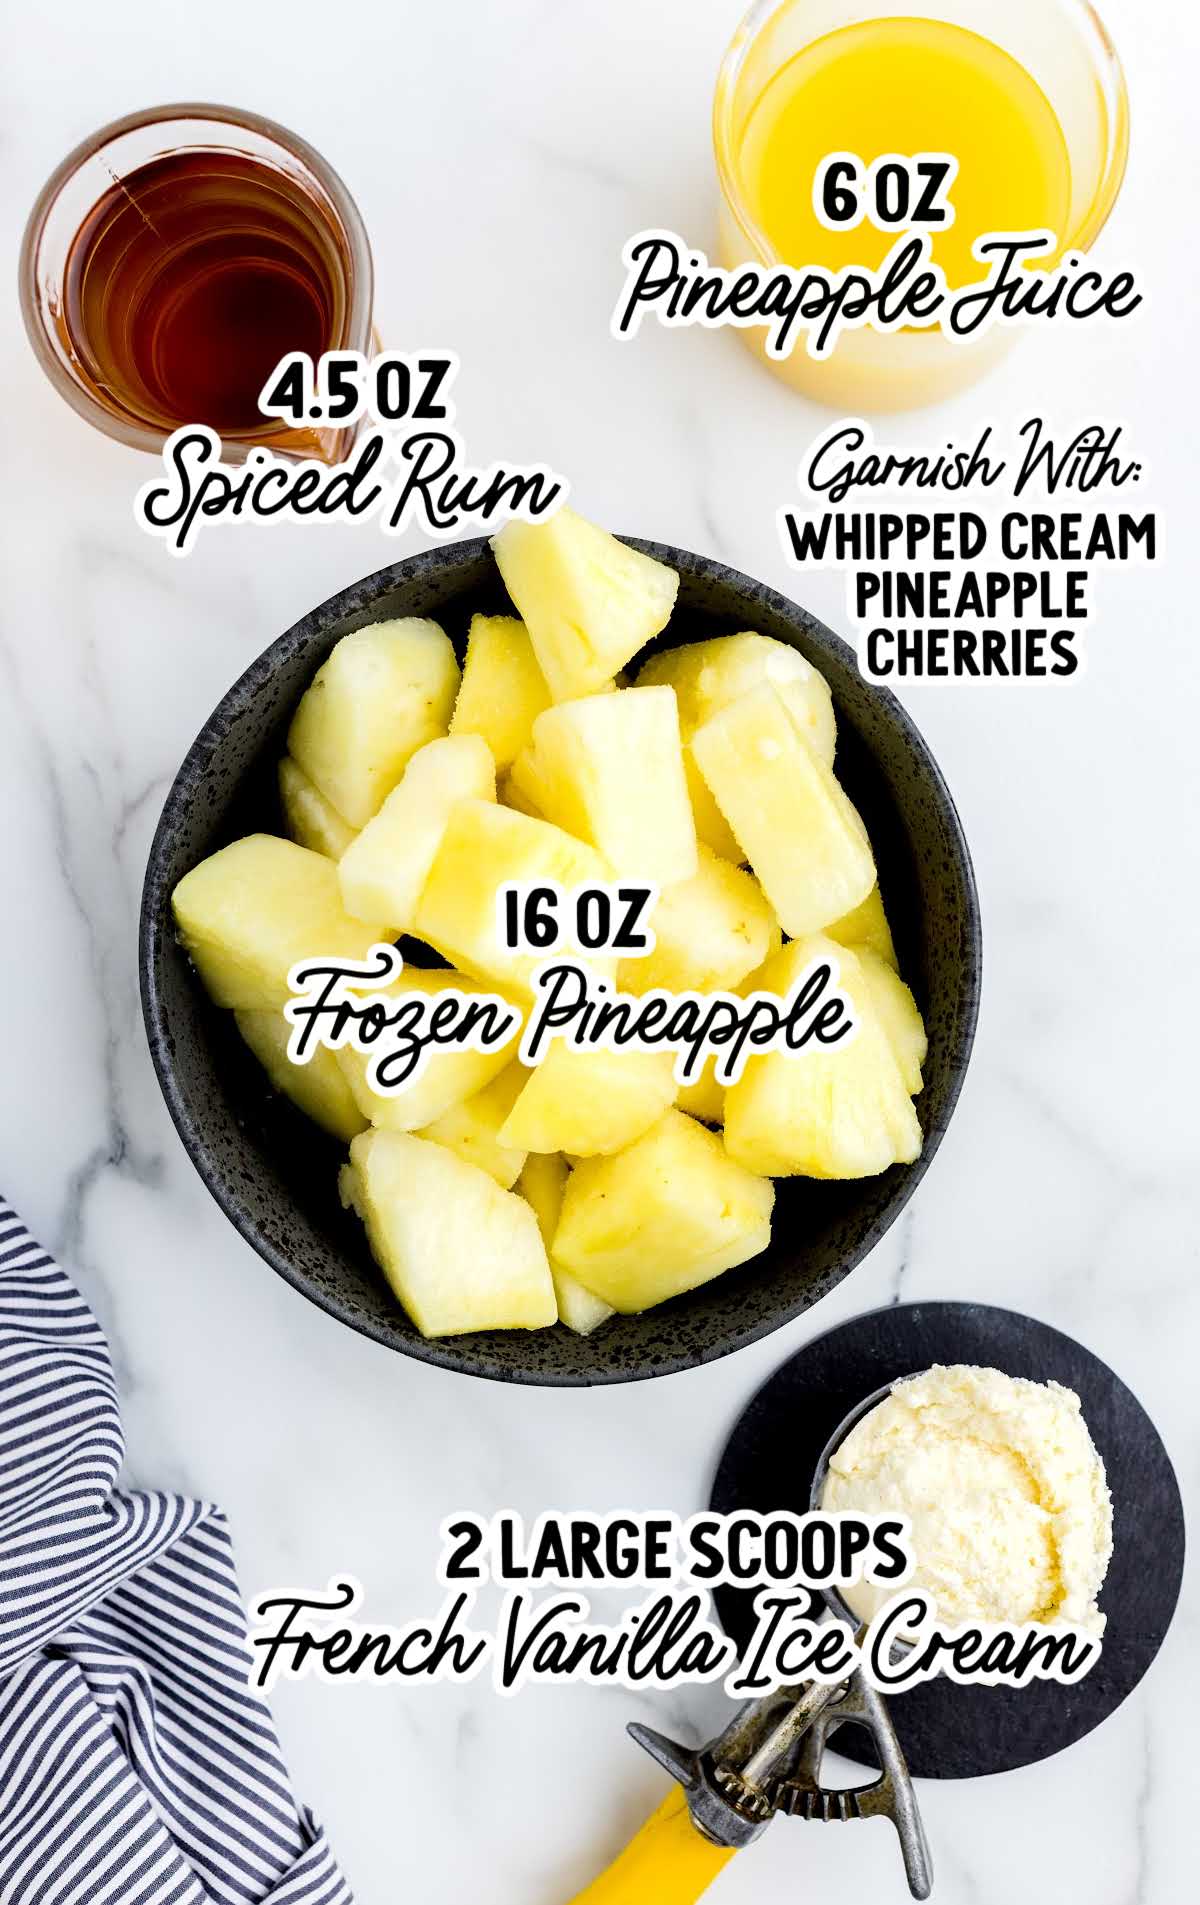 Boozy Dole Whip raw ingredients that are labeled